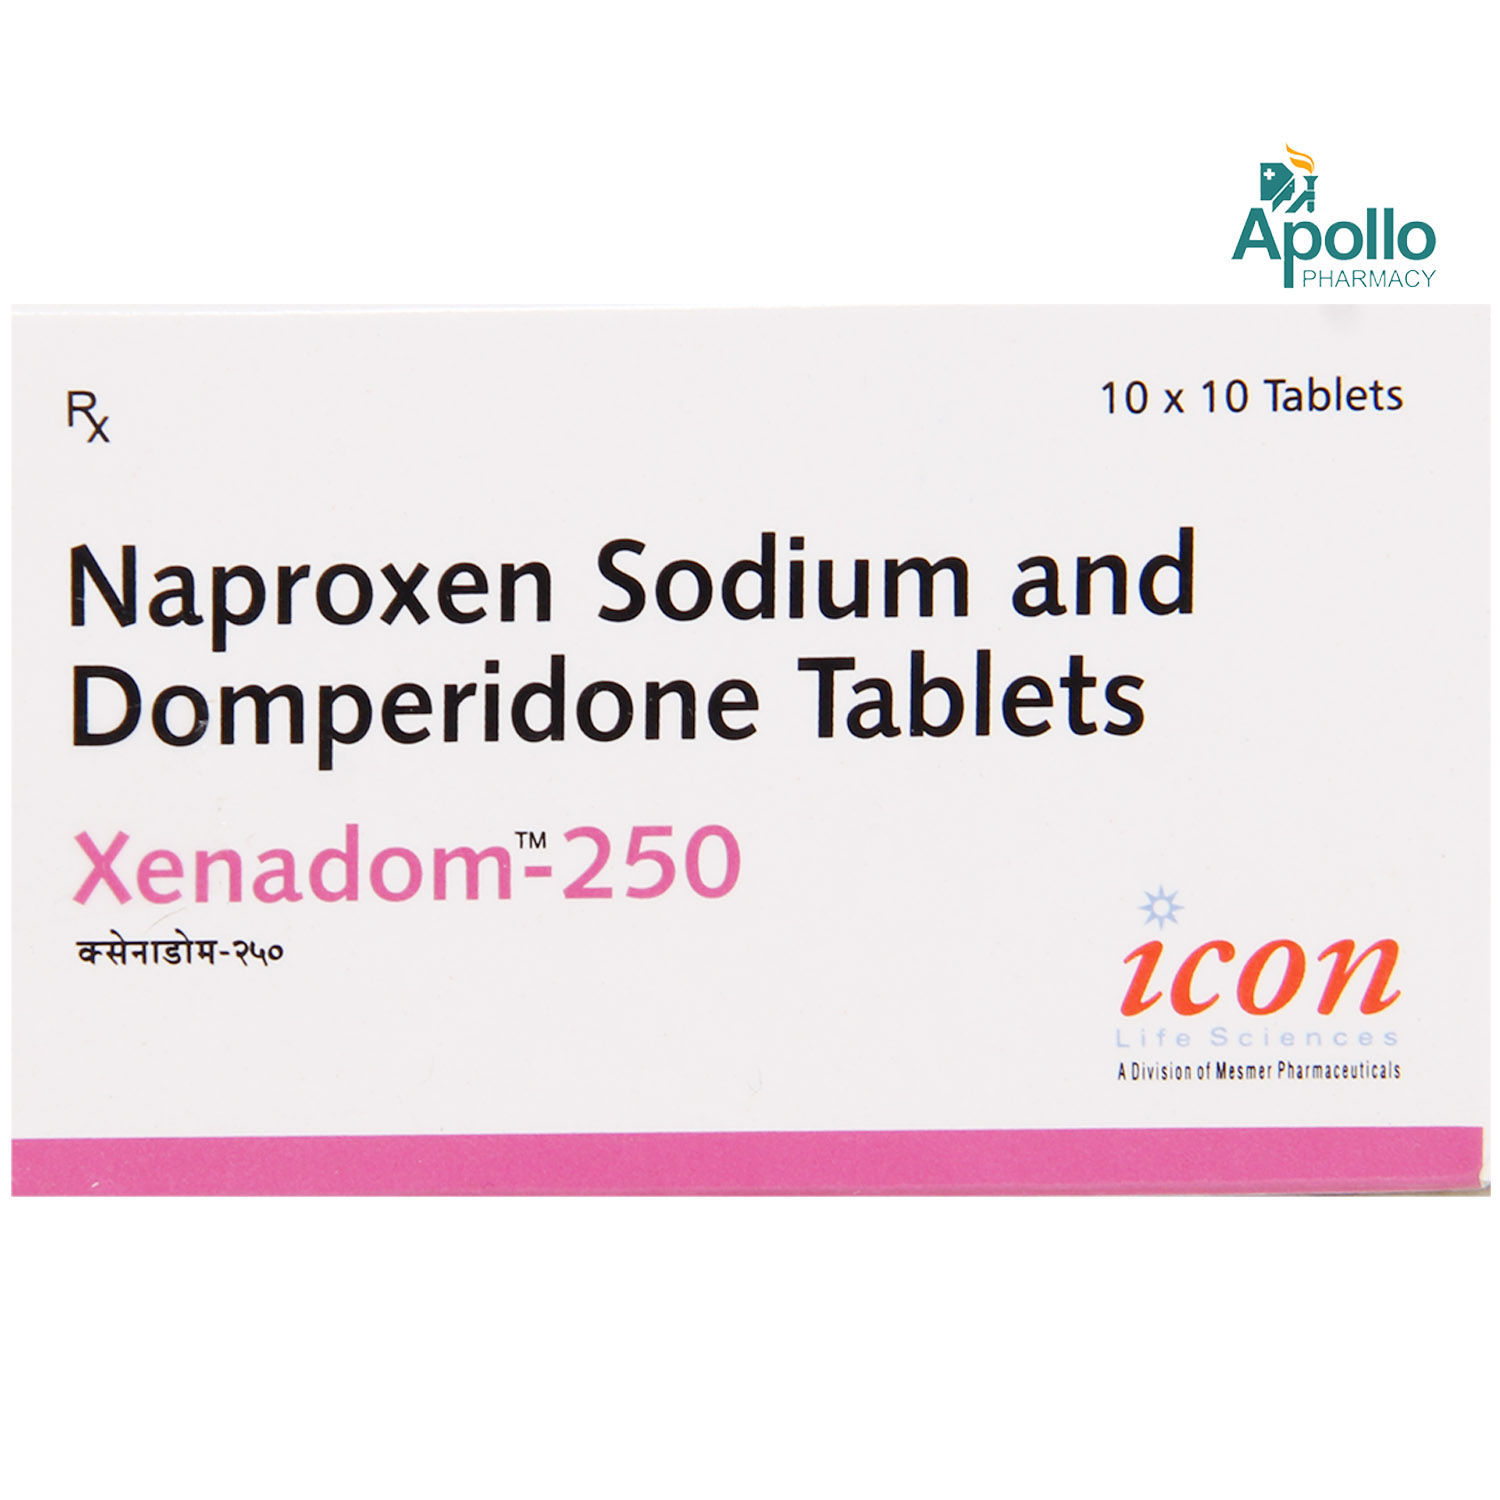 Xenadom-250 Tablet 10's, Pack of 10 TABLETS